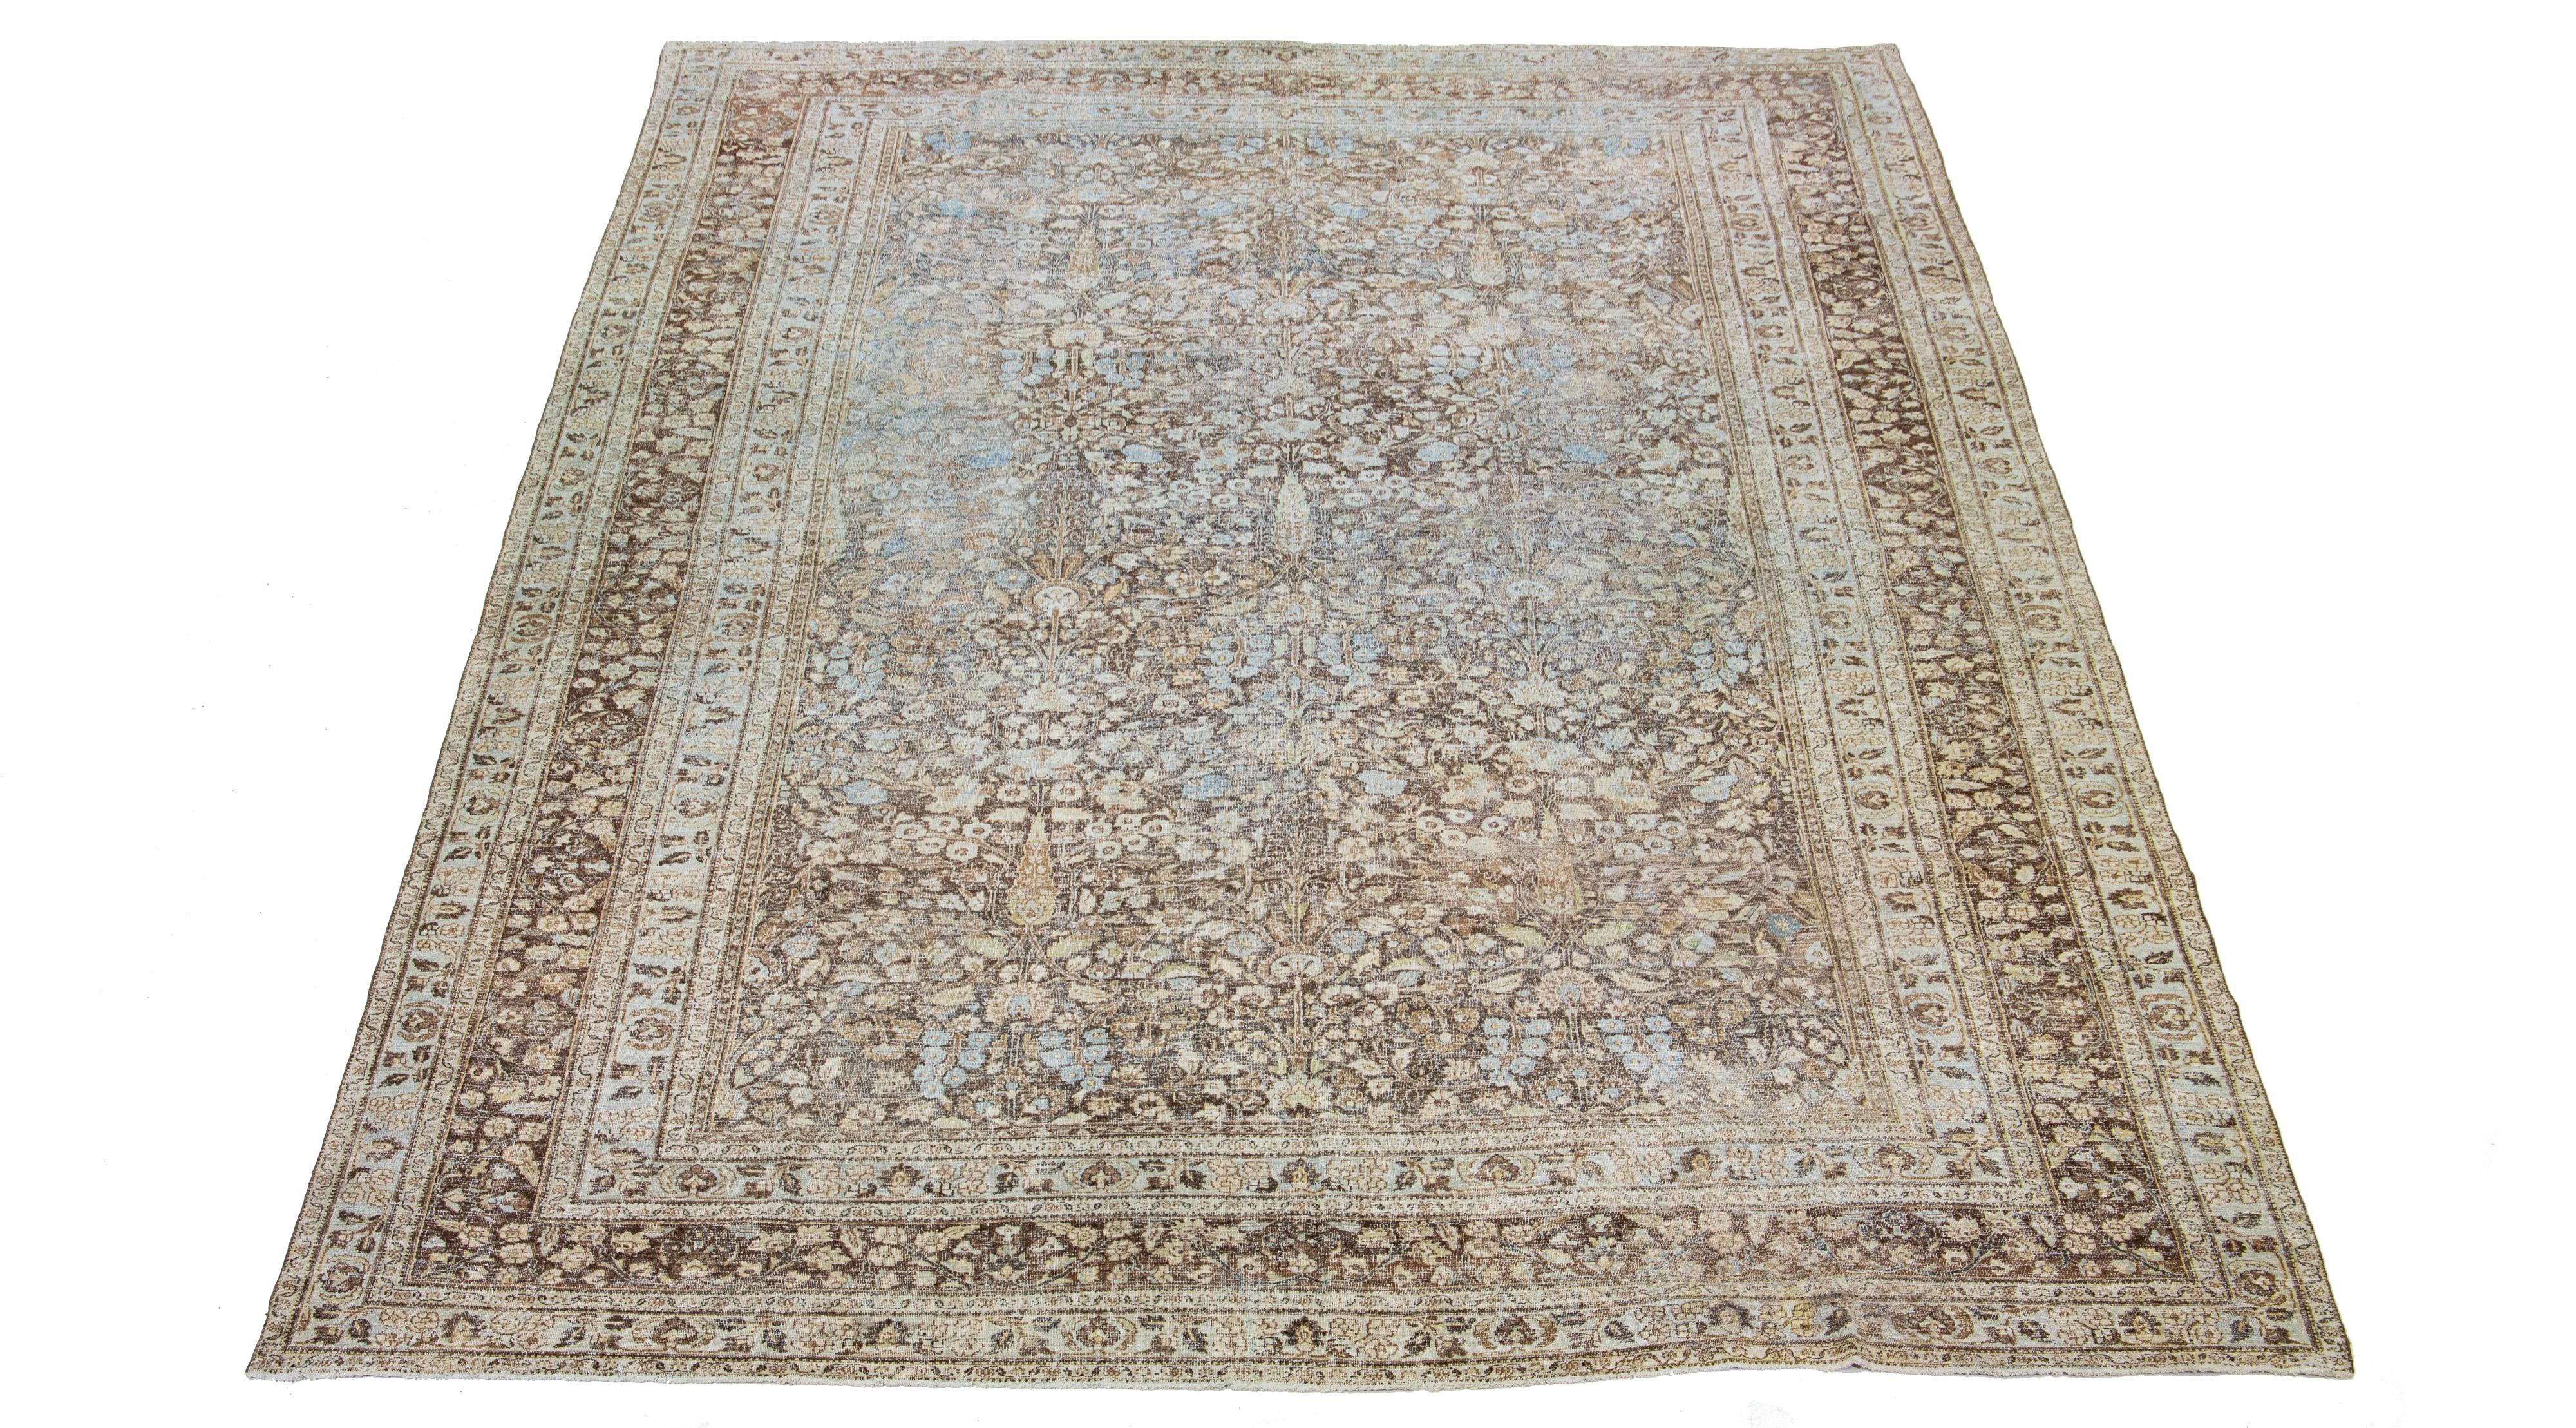 This artisan-crafted Persian Tabriz wool rug dating back to the 1890s, showcases an exquisite, classic rosette pattern. A deep blue hue beautifully punctuates the design, offering a distinct contrast against the rug's brown backdrop.

This rug